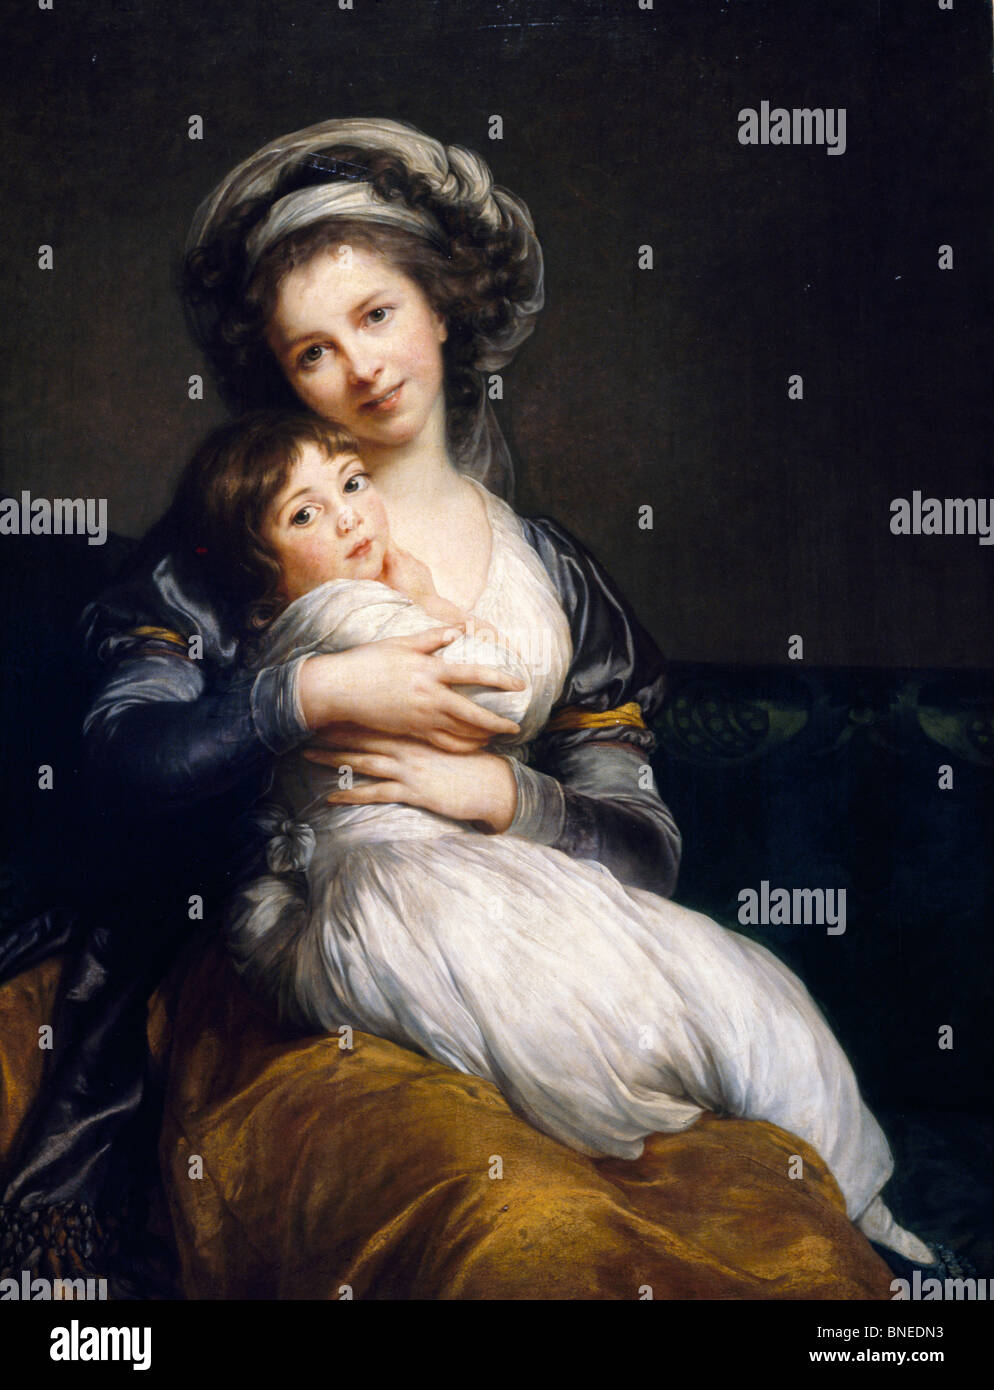 Vigee lebrun and Her Daughter Jeanne Lucie Louise, by Elisabeth Louise Vigee Le Brun 1755-1842, France, Paris, Musee du Louvre Stock Photo